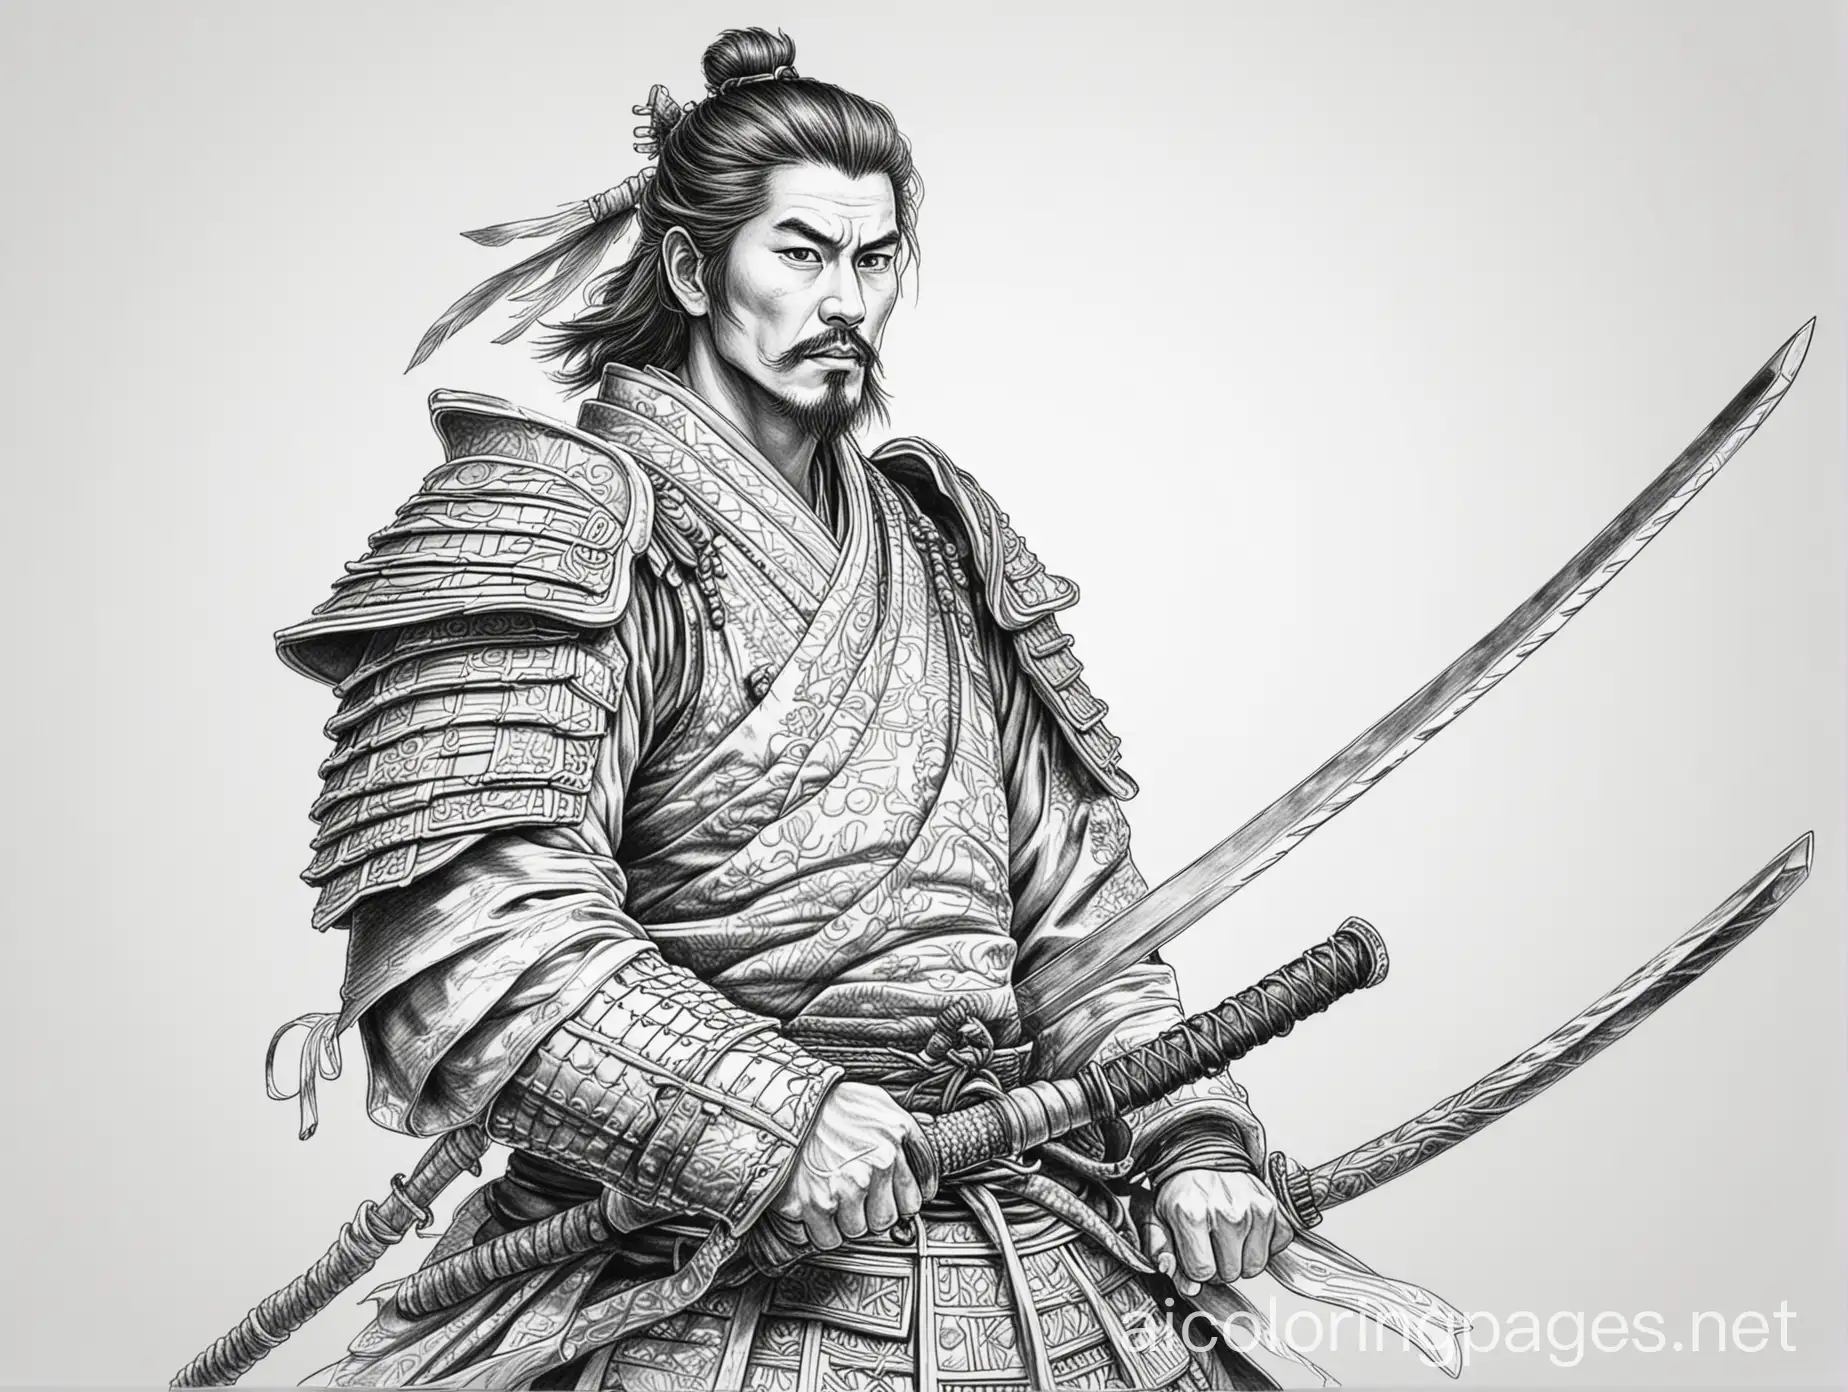 samurai, Coloring Page, black and white, line art, white background, Simplicity, Ample White Space. The background of the coloring page is plain white to make it easy for young children to color within the lines. The outlines of all the subjects are easy to distinguish, making it simple for kids to color without too much difficulty